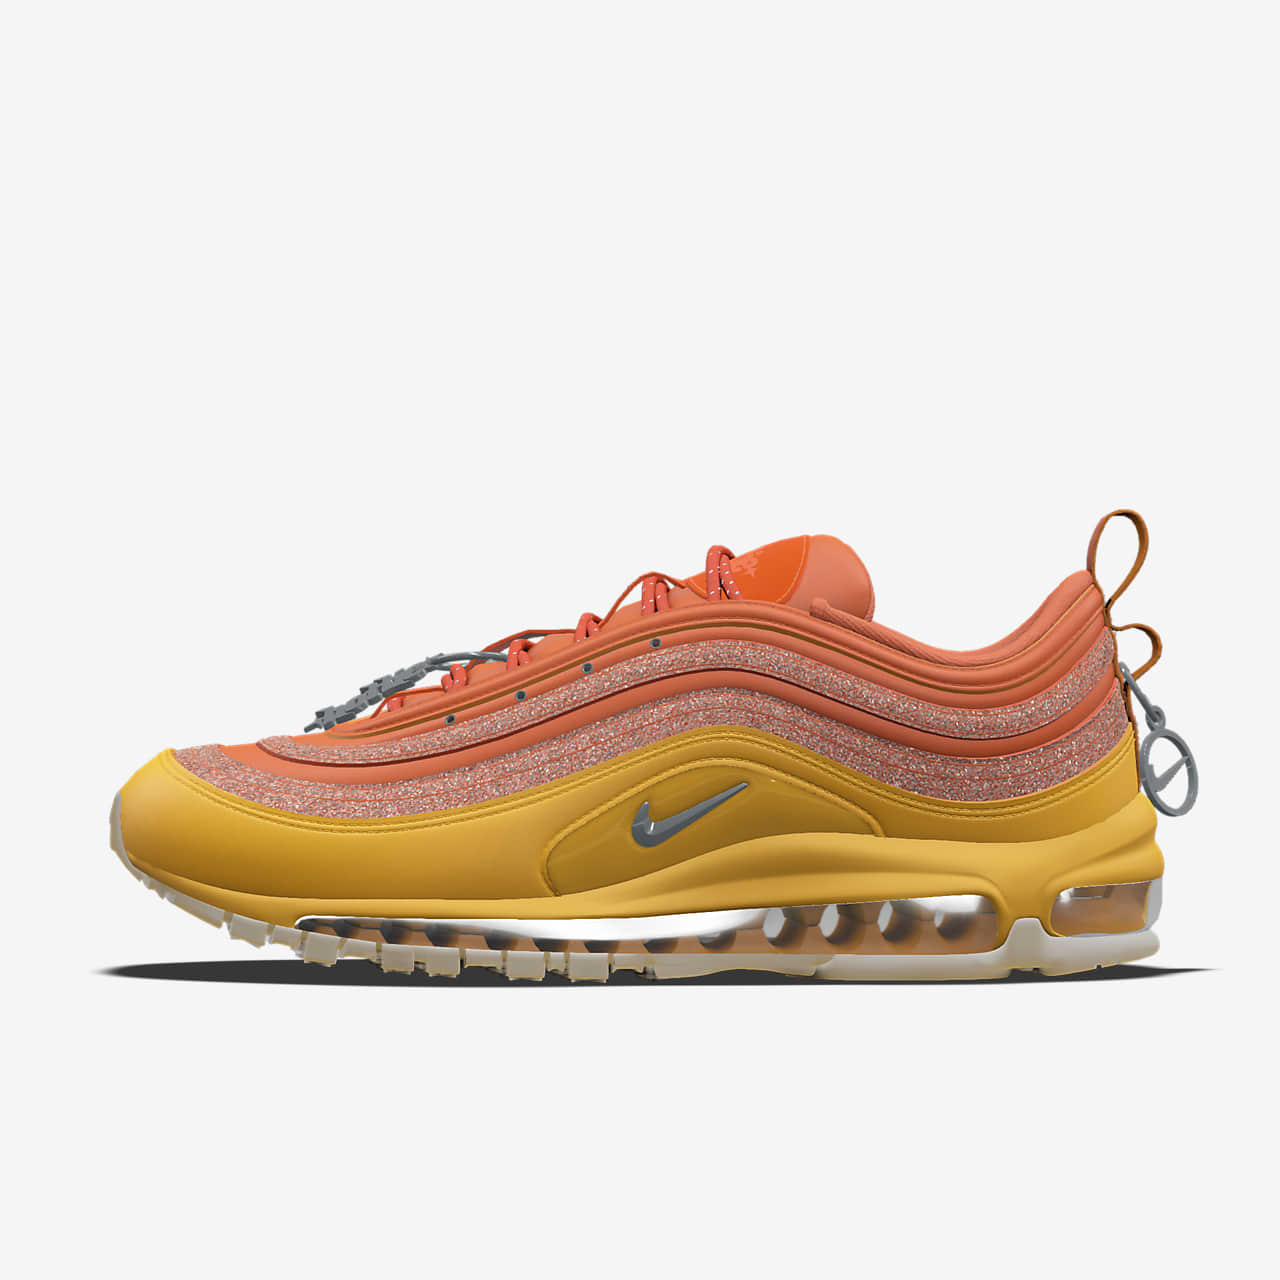 Sapatilhas personalizáveis Nike Air Max 97 "Something For Thee Hotties" By You